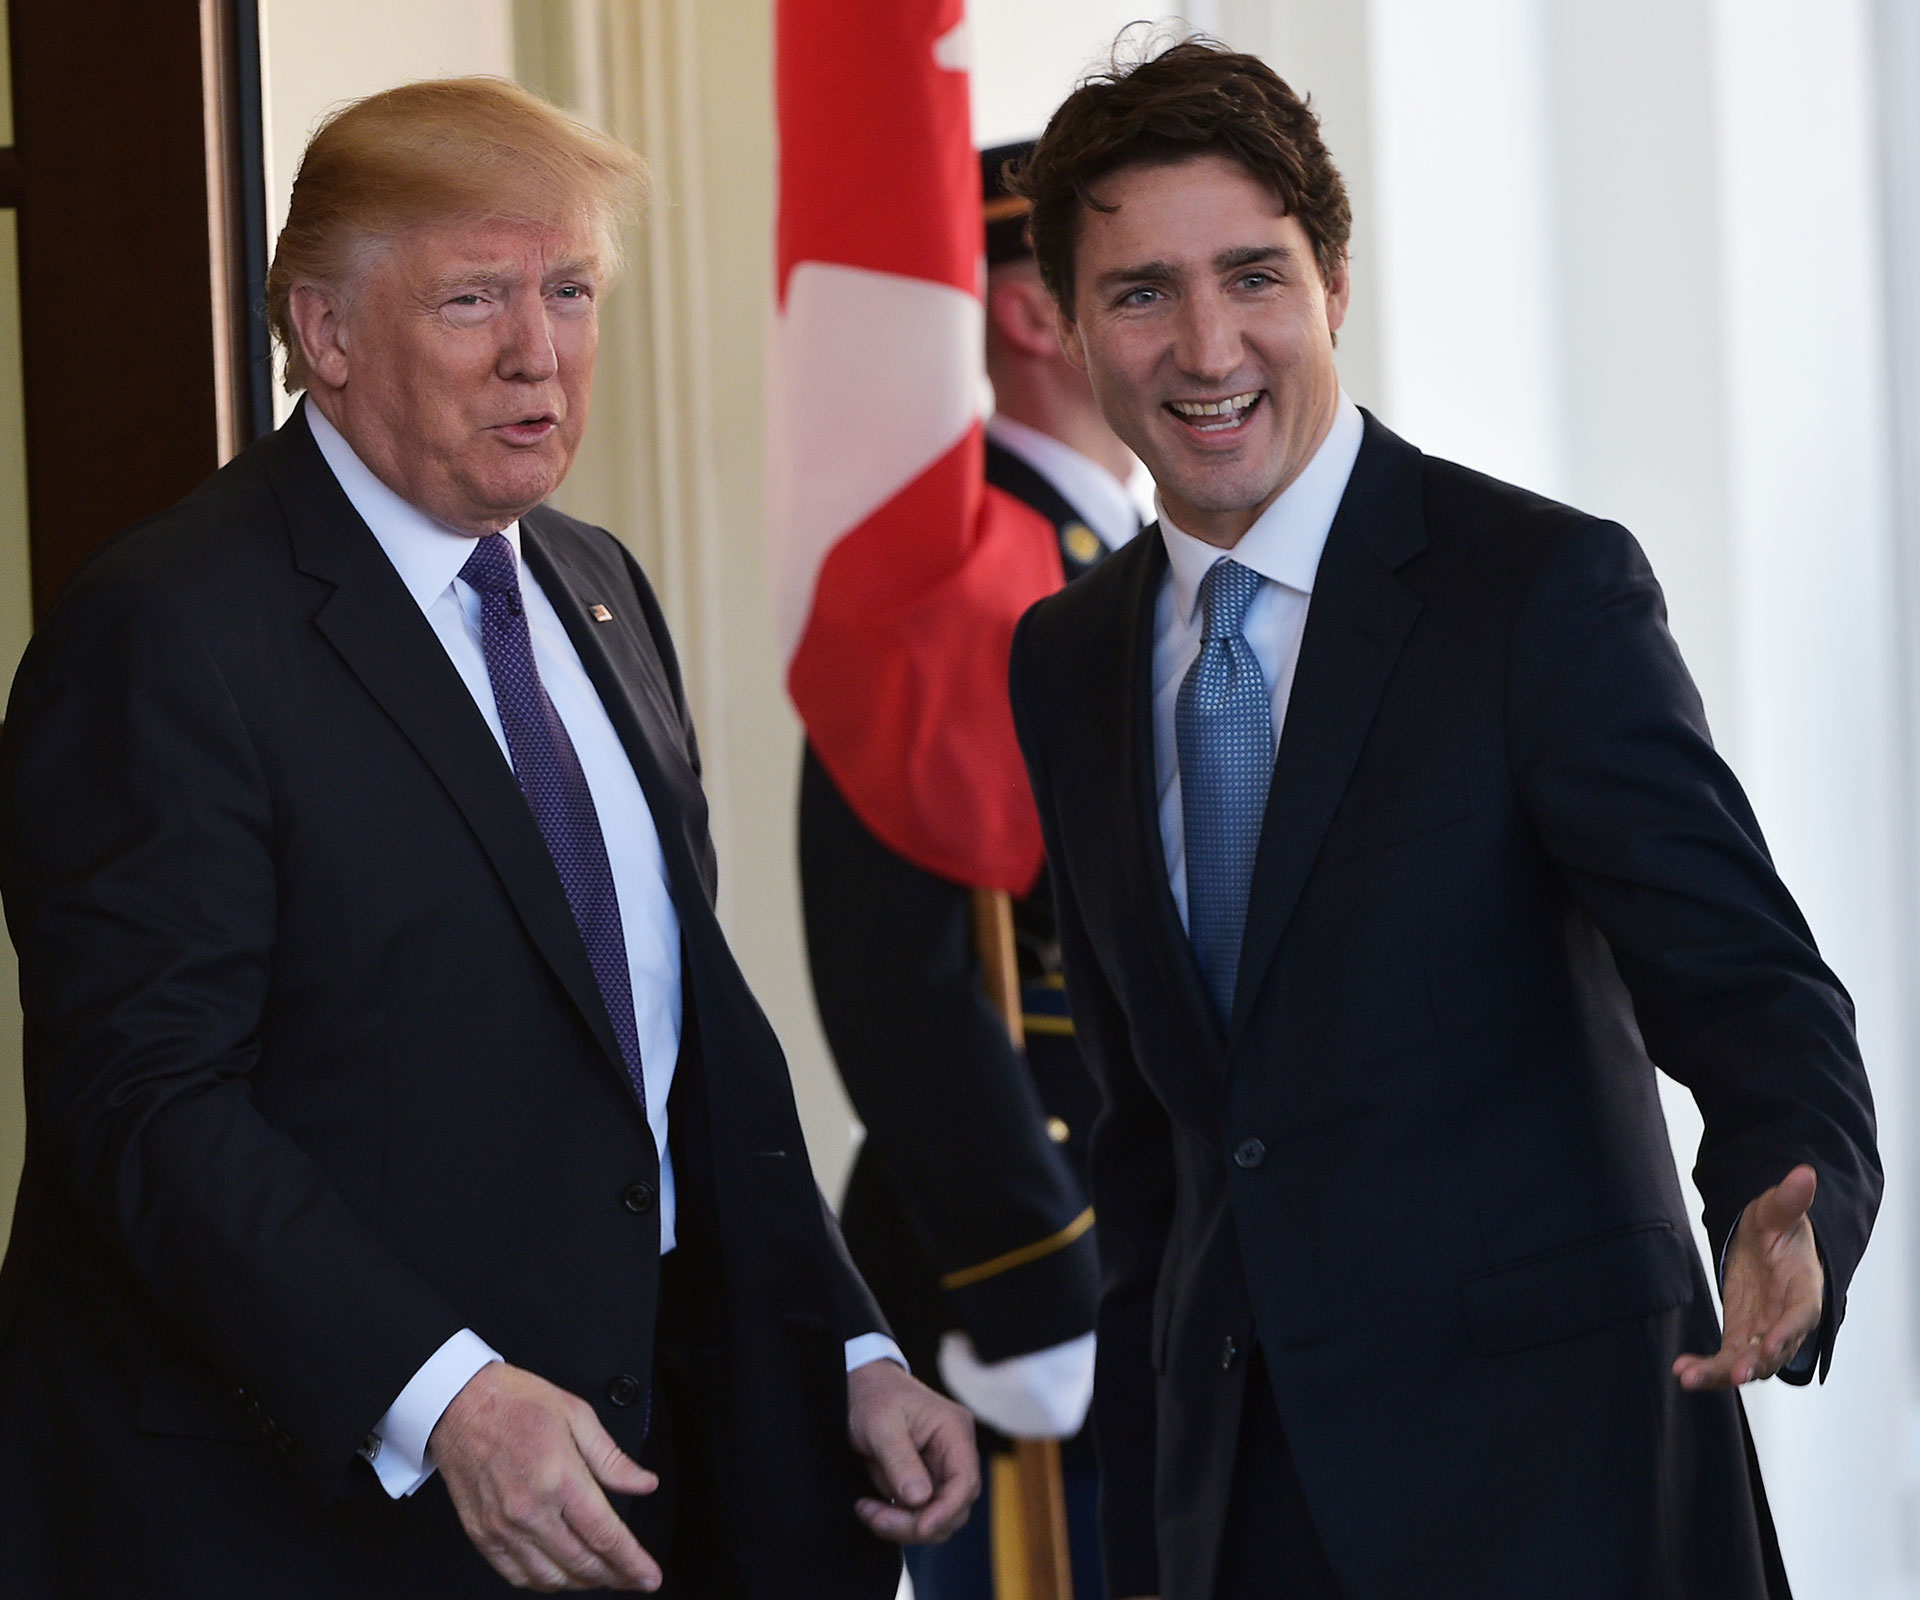 Justin Trudeau is all of us meeting Donald Trump